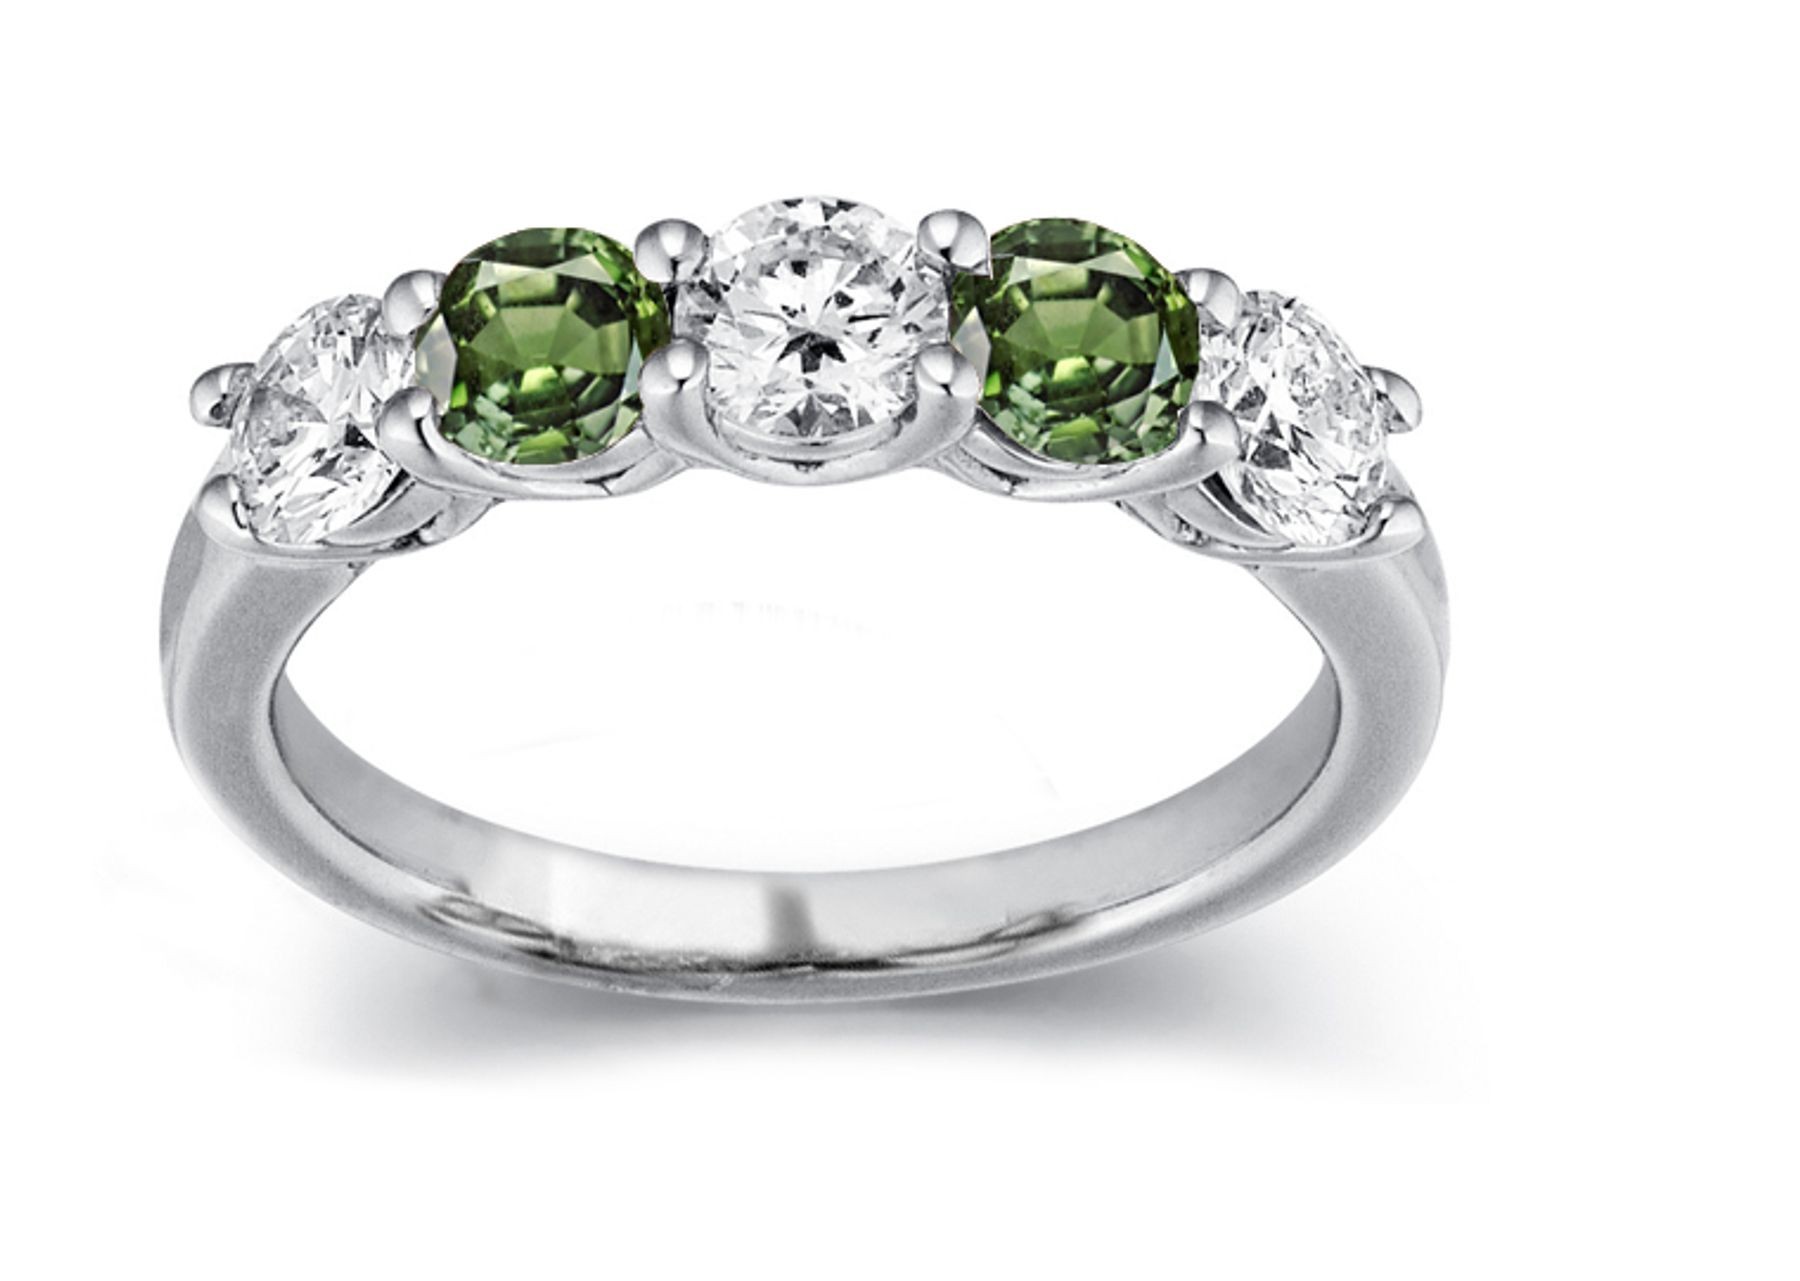 2013 Catalog No. 5 - Product Details: Truly Unique Green Sapphire & Diamond Micro Pave Ring